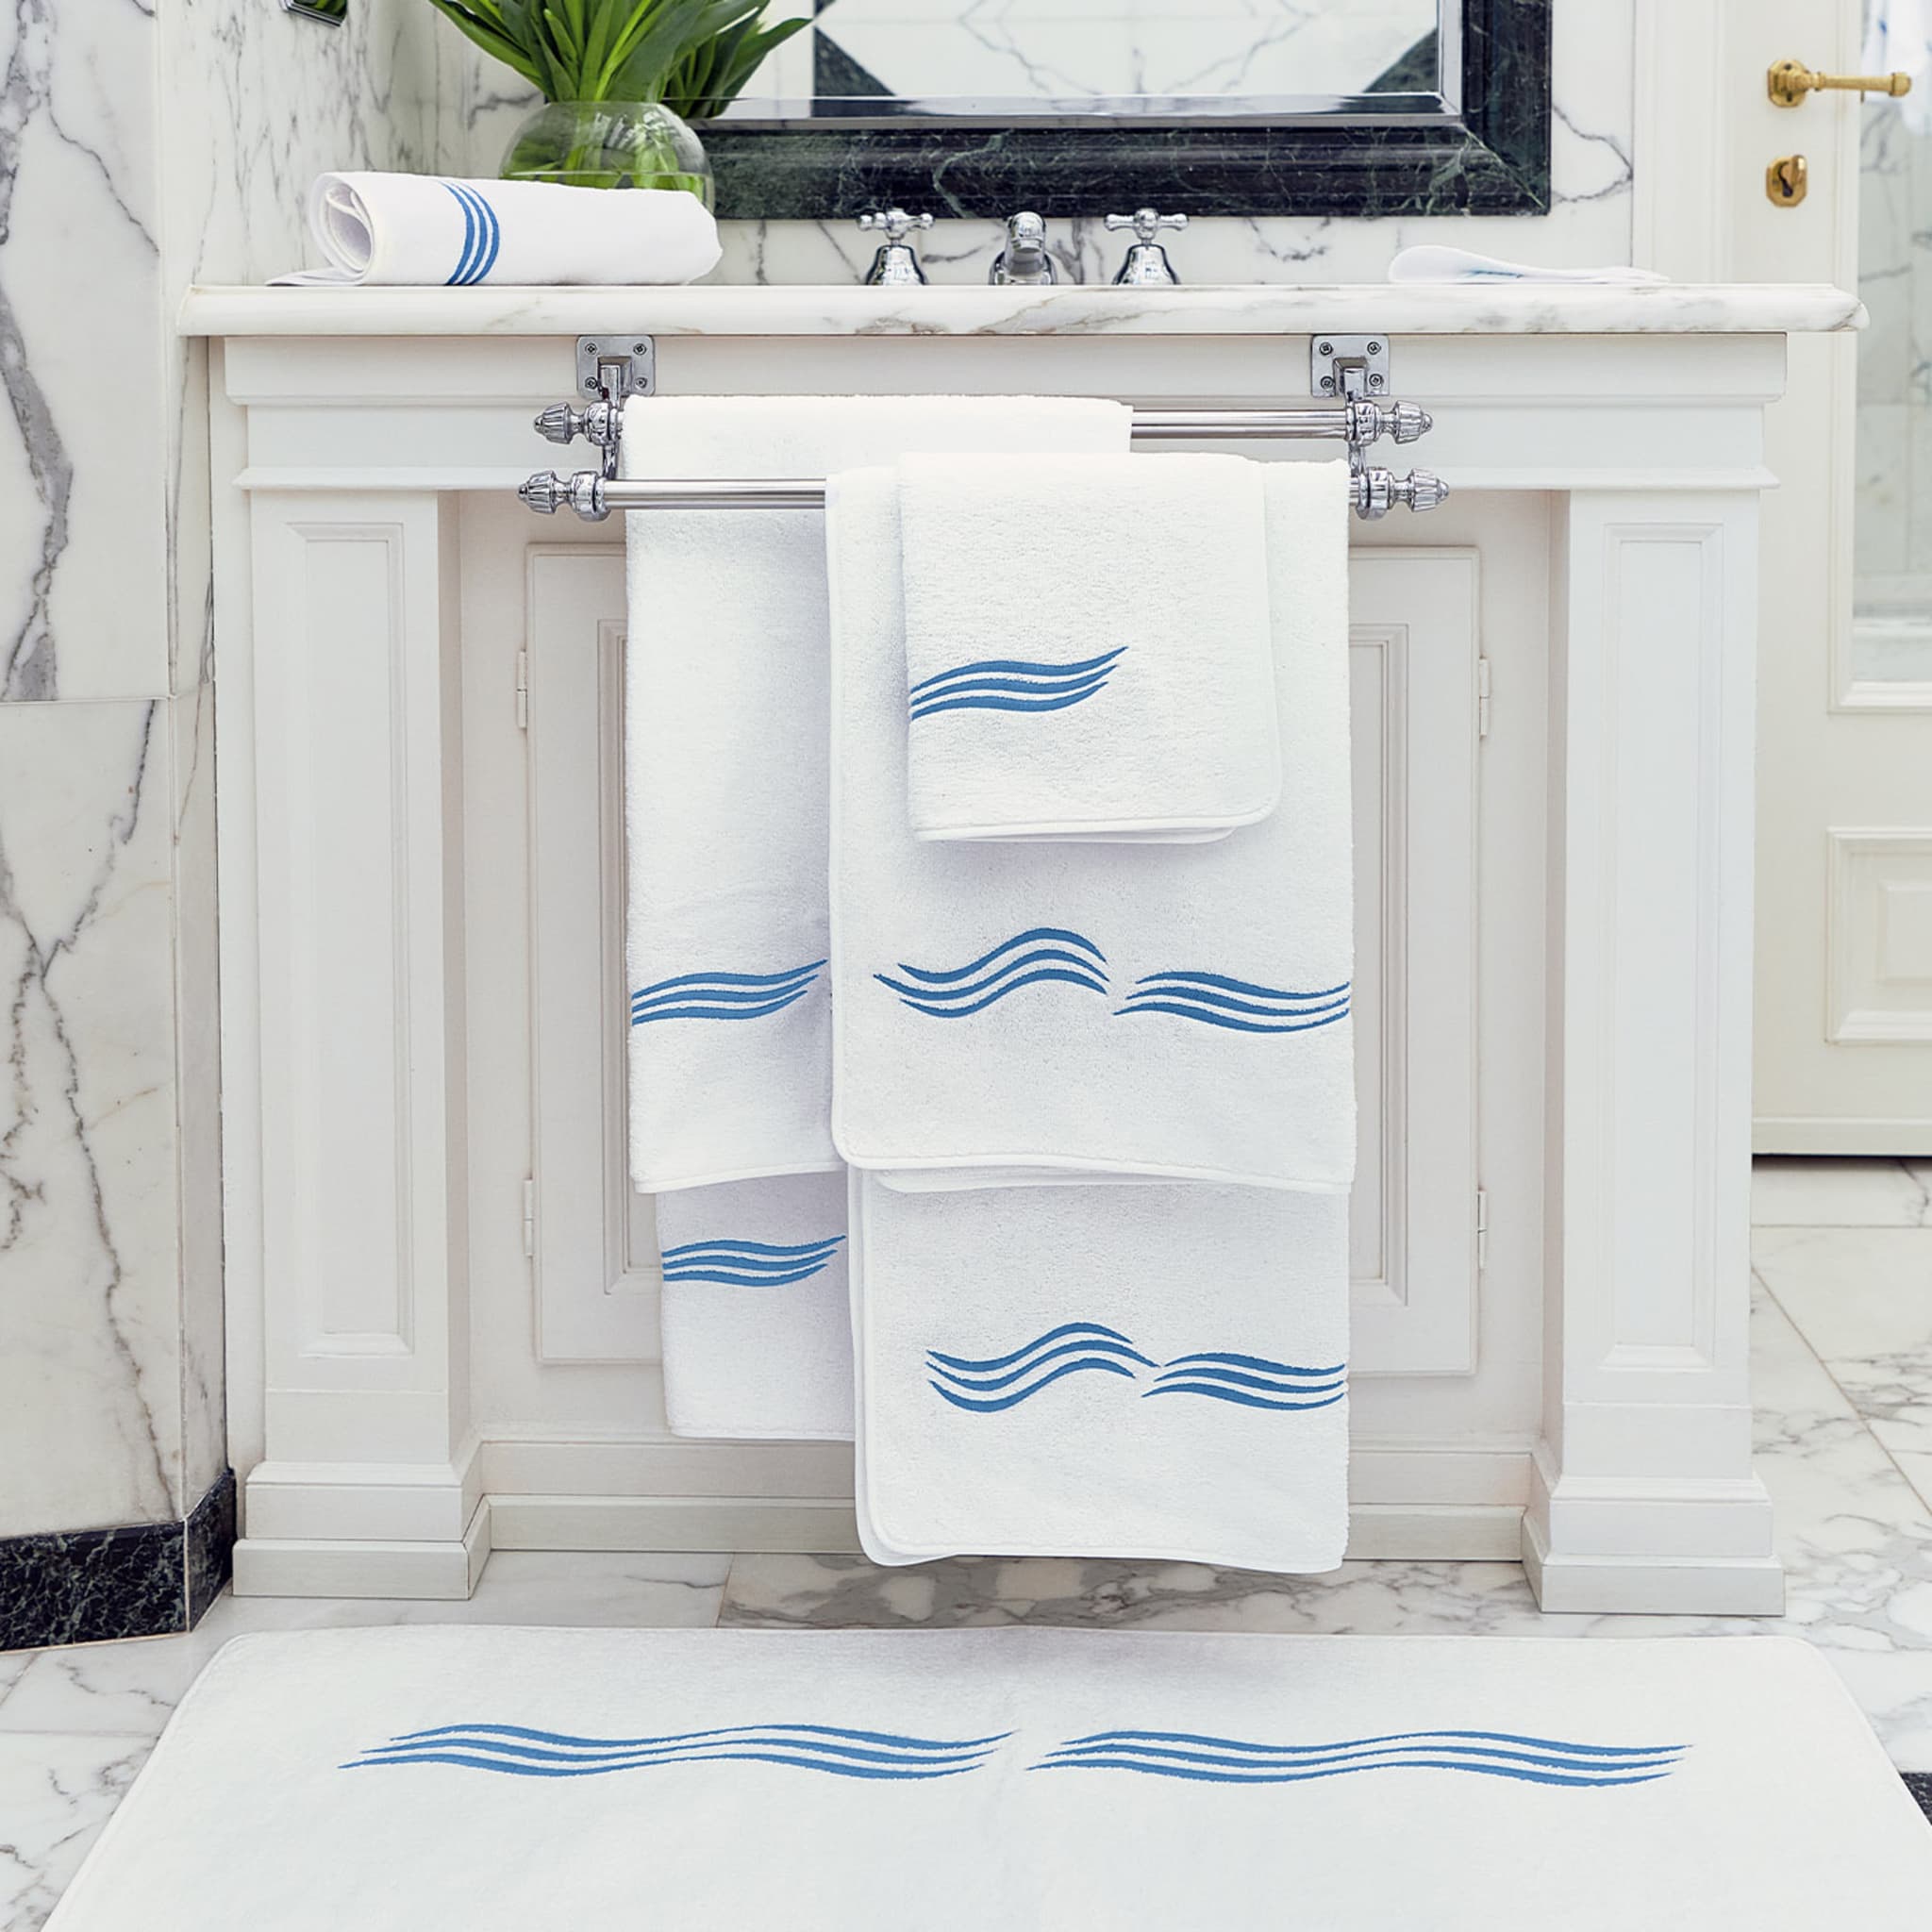 Tuffo White & Assisi Blue Hand Towel - Alternative view 1